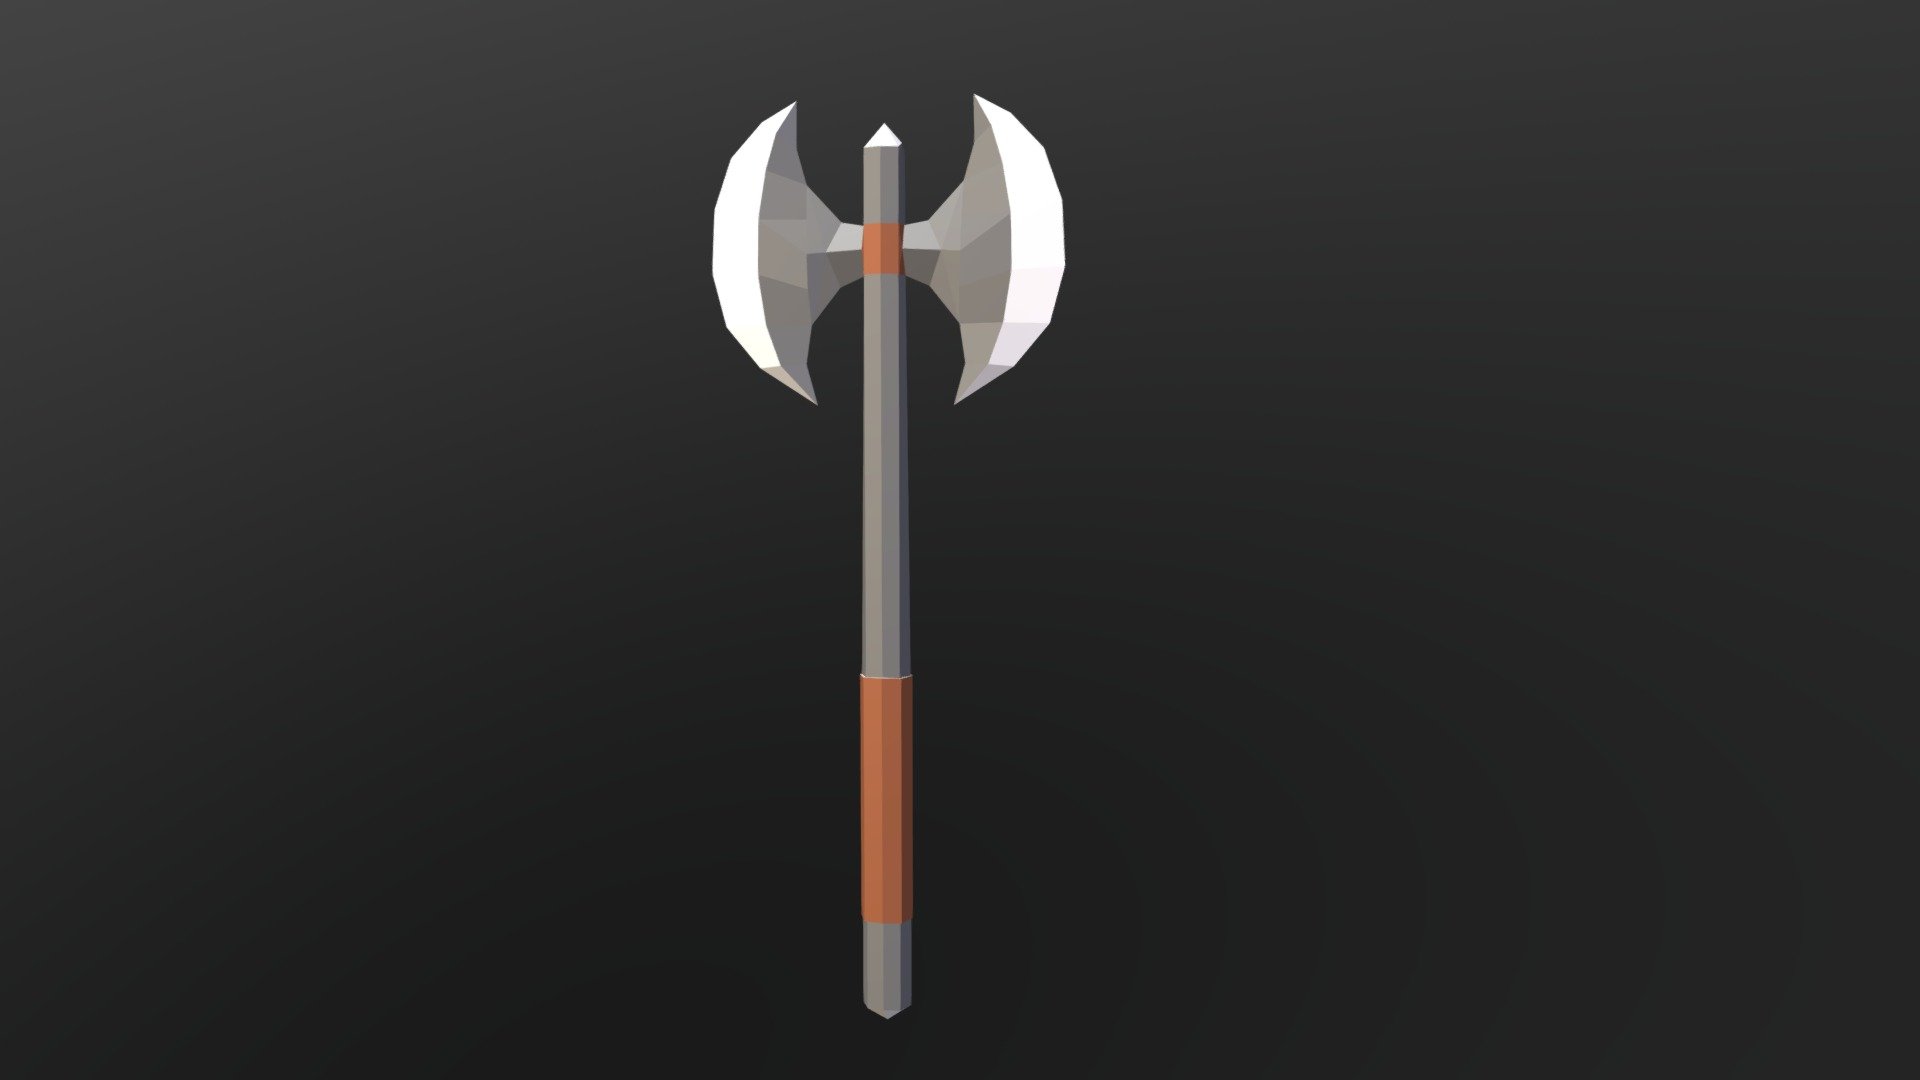 Here is a low-poly model of an axe, which would be great for an RPG or Action game with its stylized look. The simple design includes vertex coloring to make the design look more cartoonish.

Please enjoy, and feel free to use for any project! - Low-poly Axe - Download Free 3D model by Mesh-Base 3d model